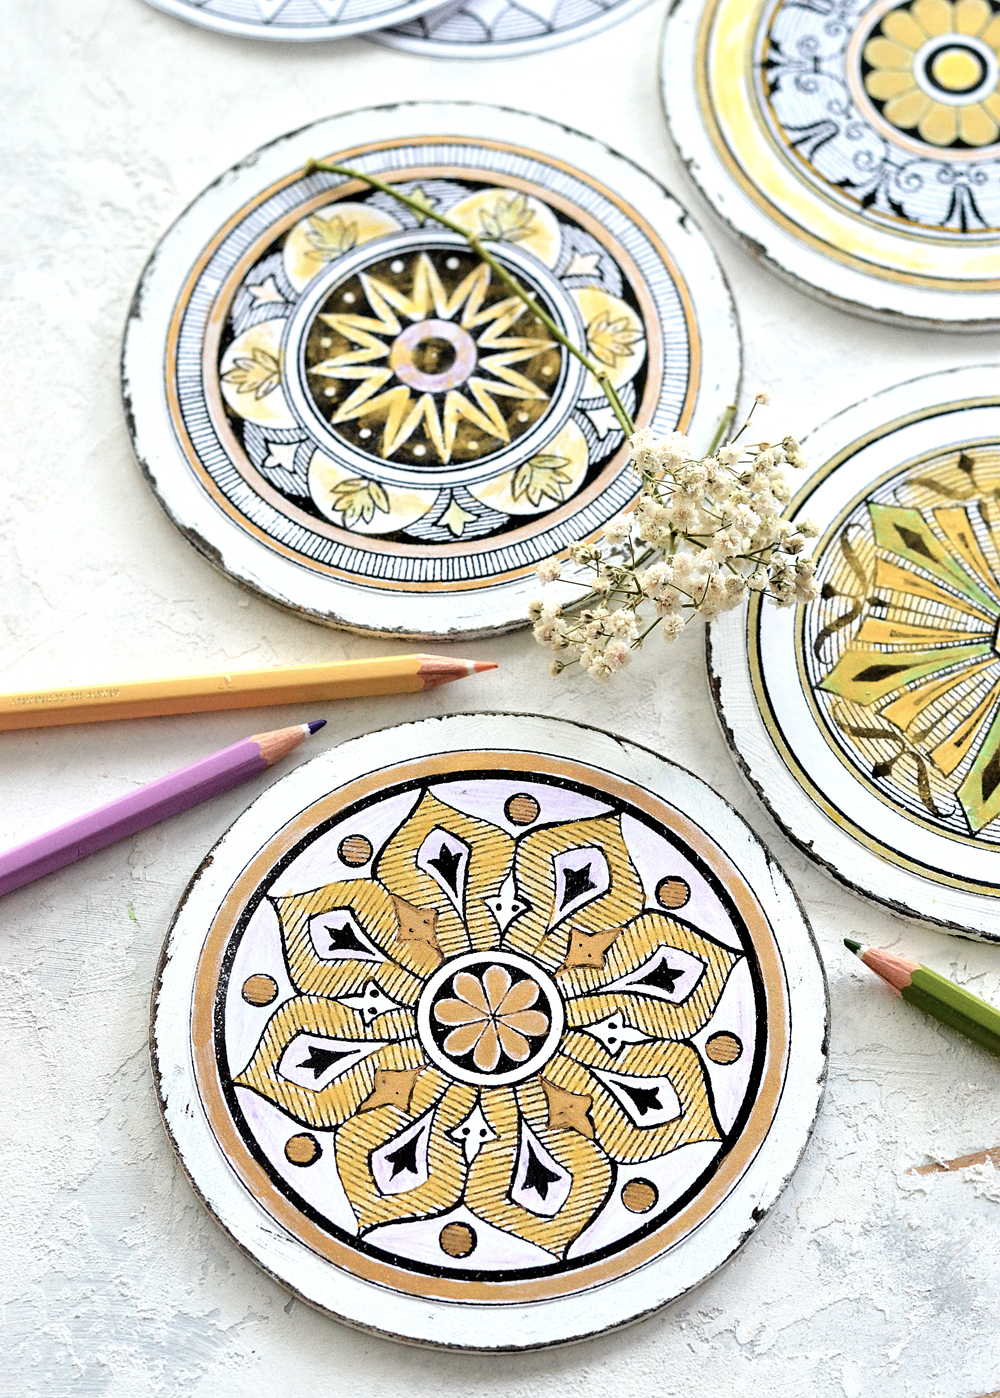 DIY Antique Adult Coloring Medallions & free printable!